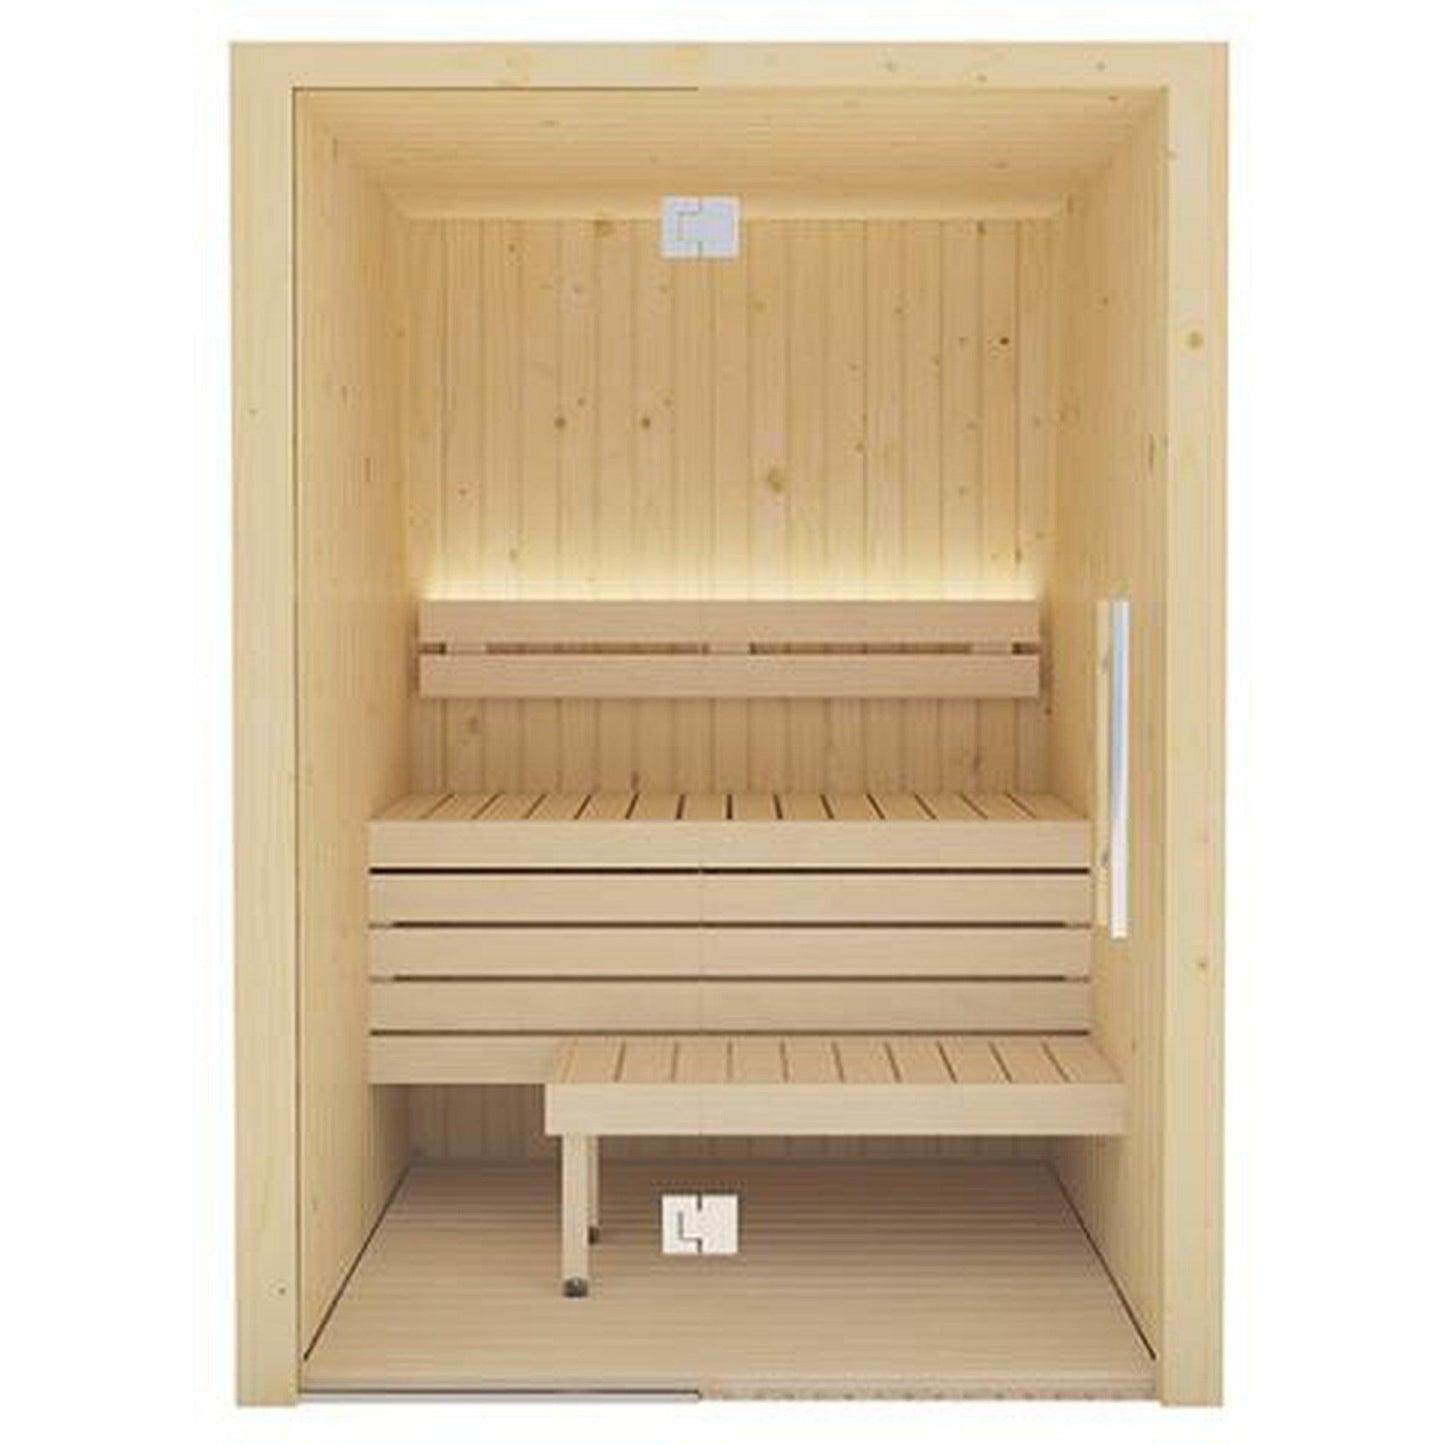 SaunaLife XPERIENCE Series Model X2 Indoor Home Sauna DIY Kit With LED Light System (1-2-Person)